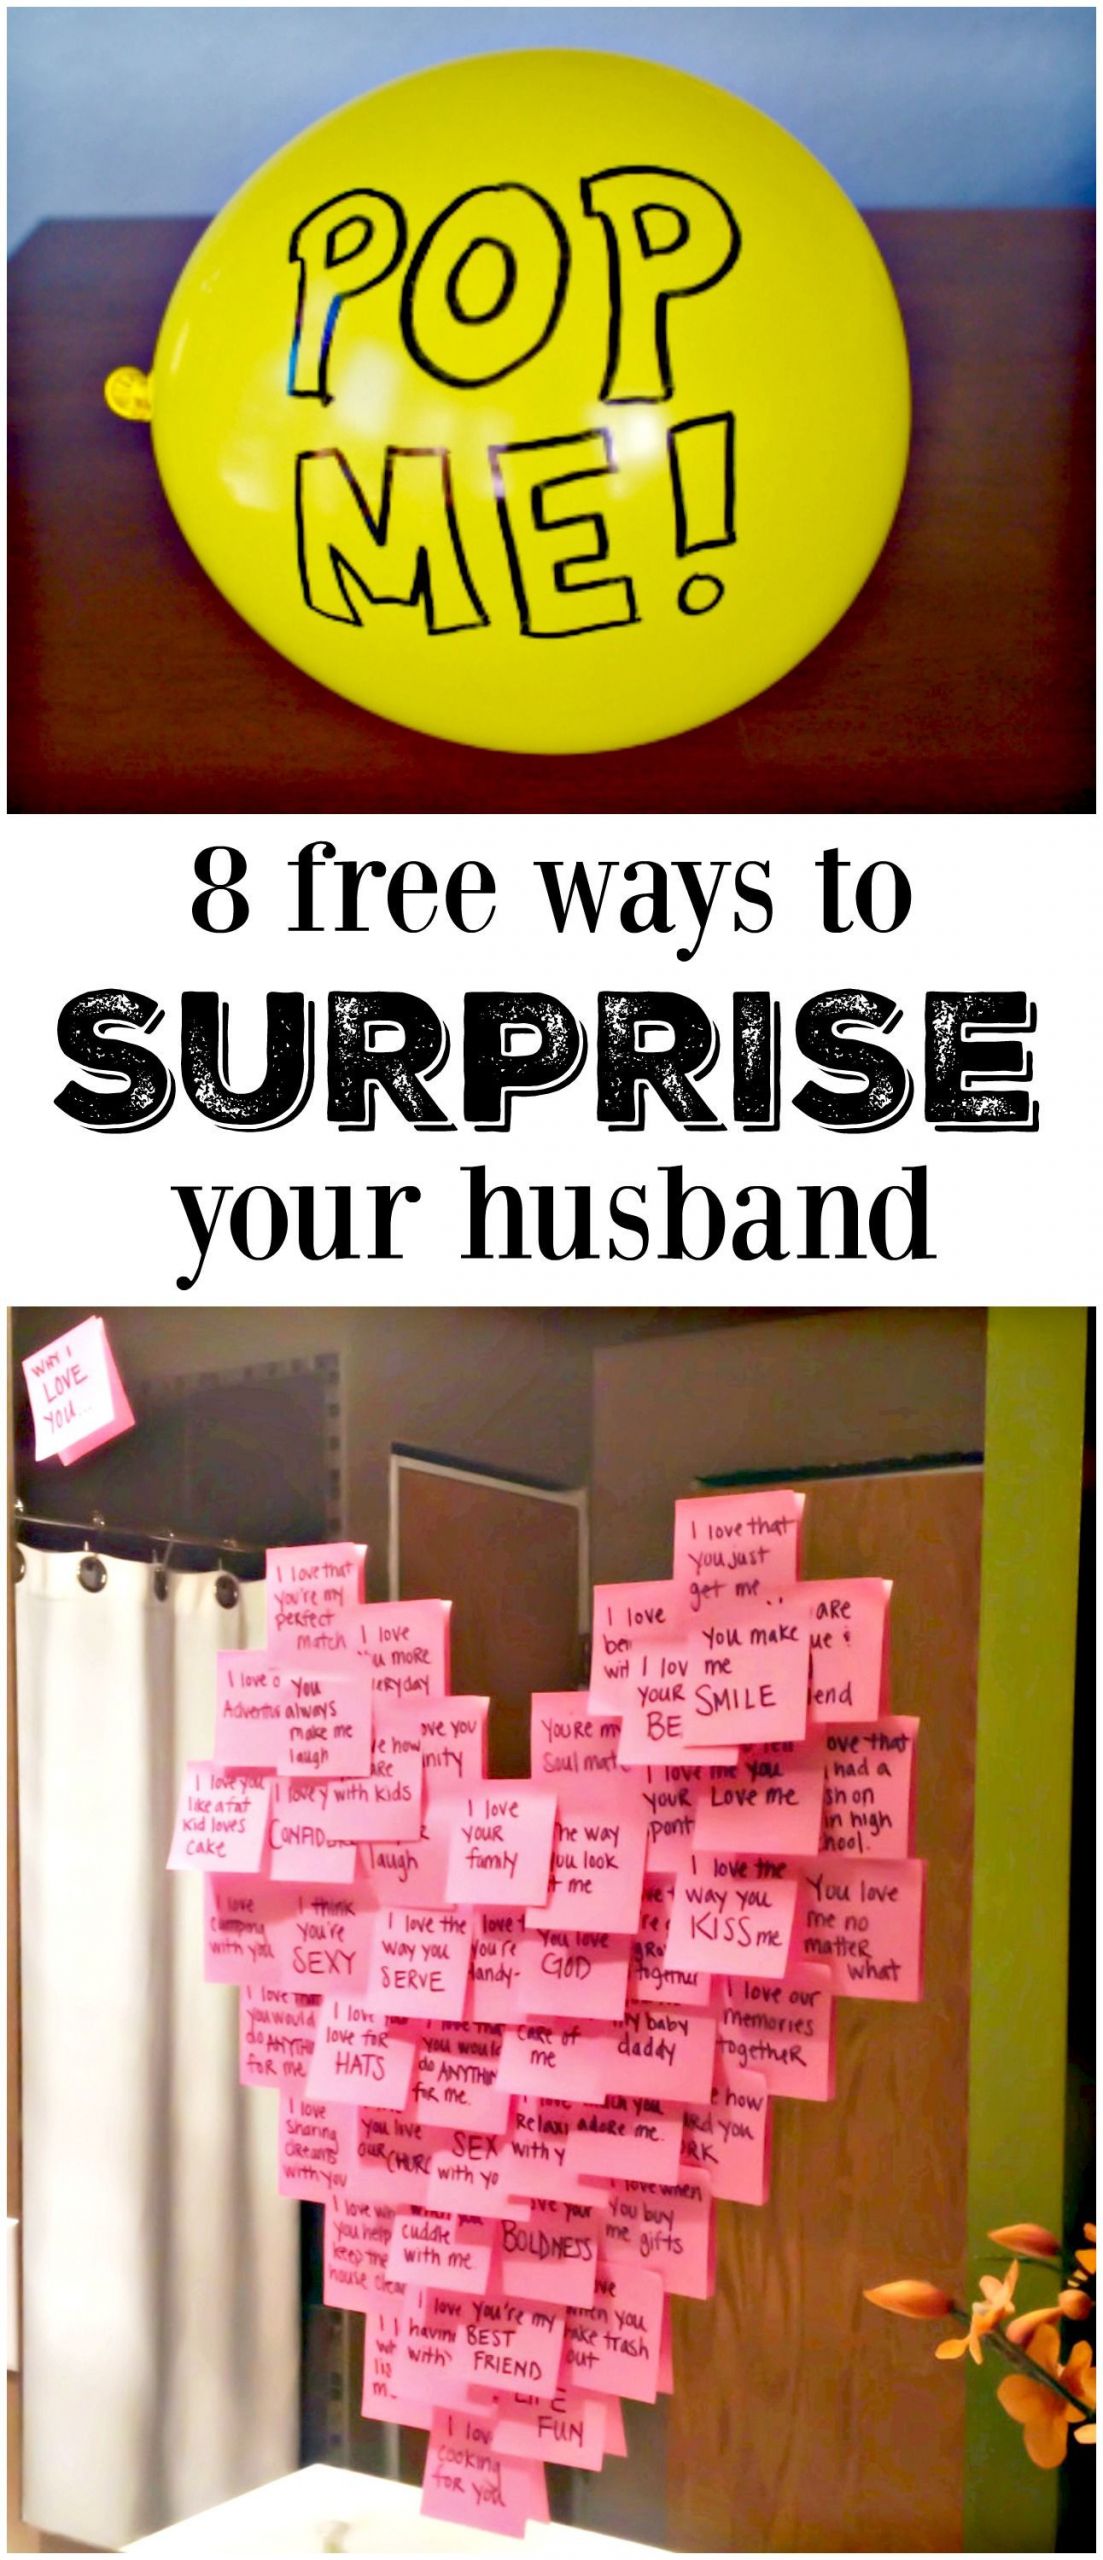 Valentines Gift Ideas For Your Husband
 8 Meaningful Ways to Make His Day DIY Ideas